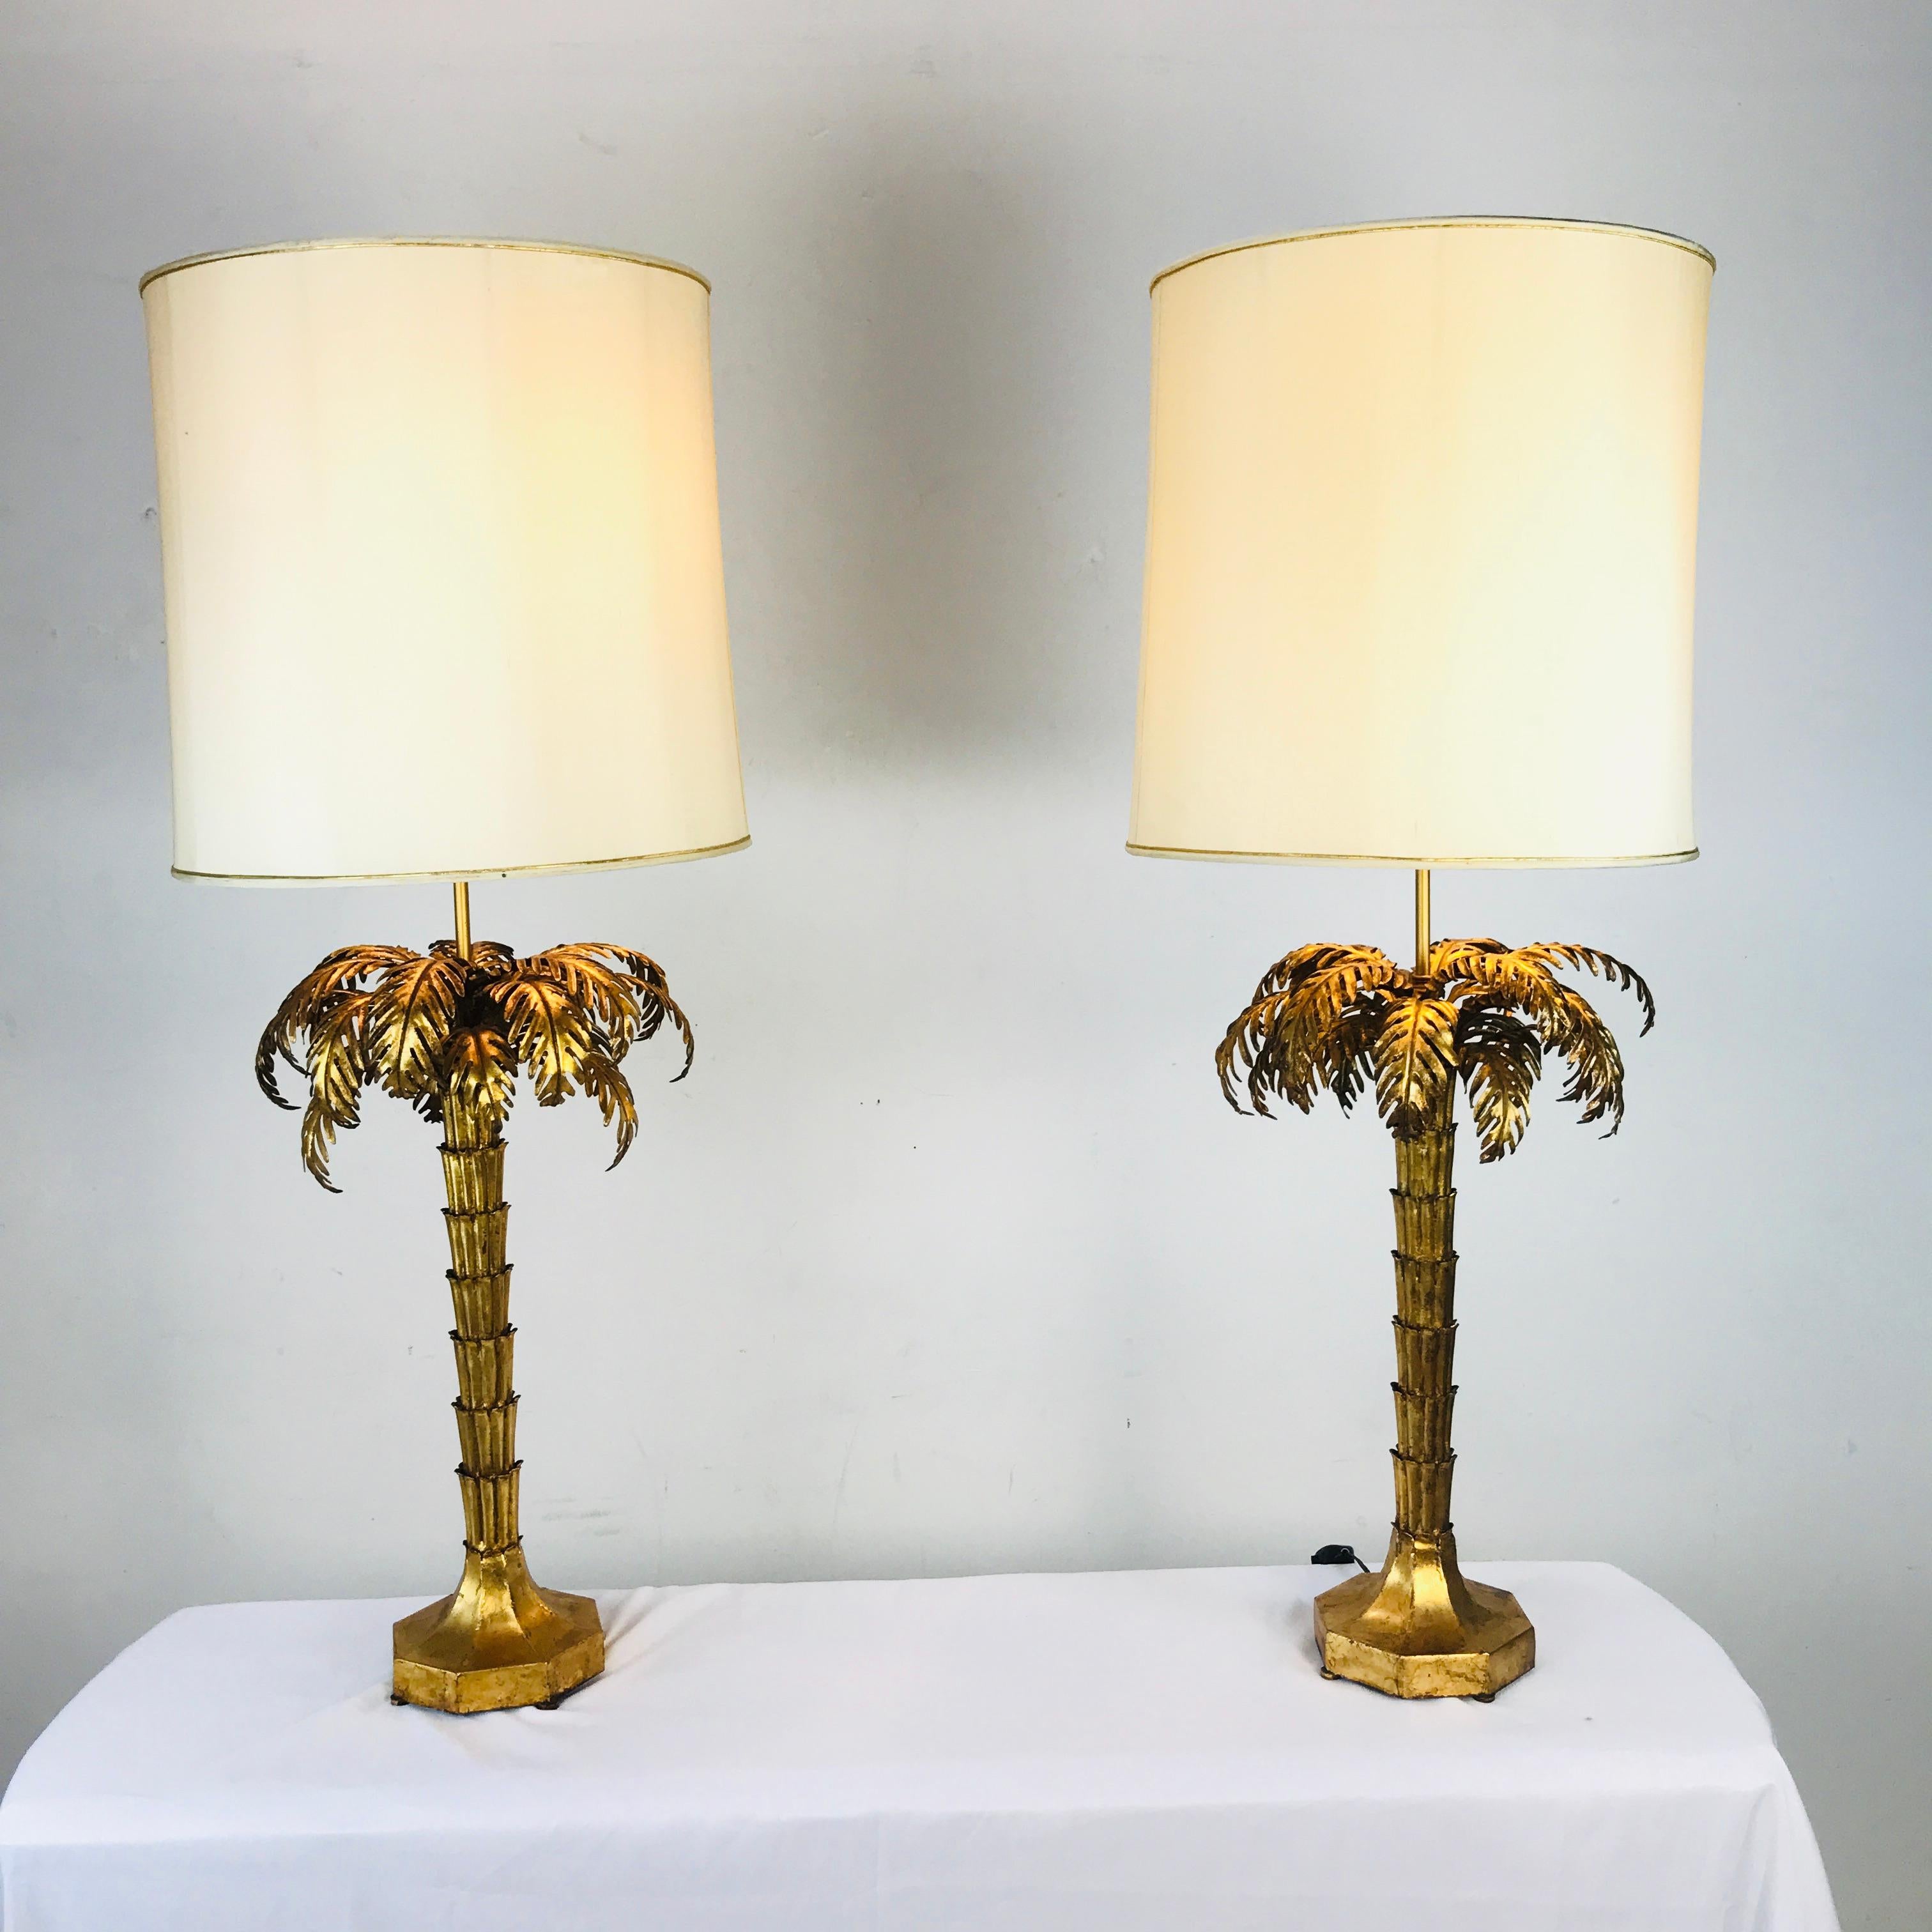 Exceptional pair of large scale gilded palm tree lamps from the 1960s. Excellent vintage condition; original wiring in good working condition. Measures 13